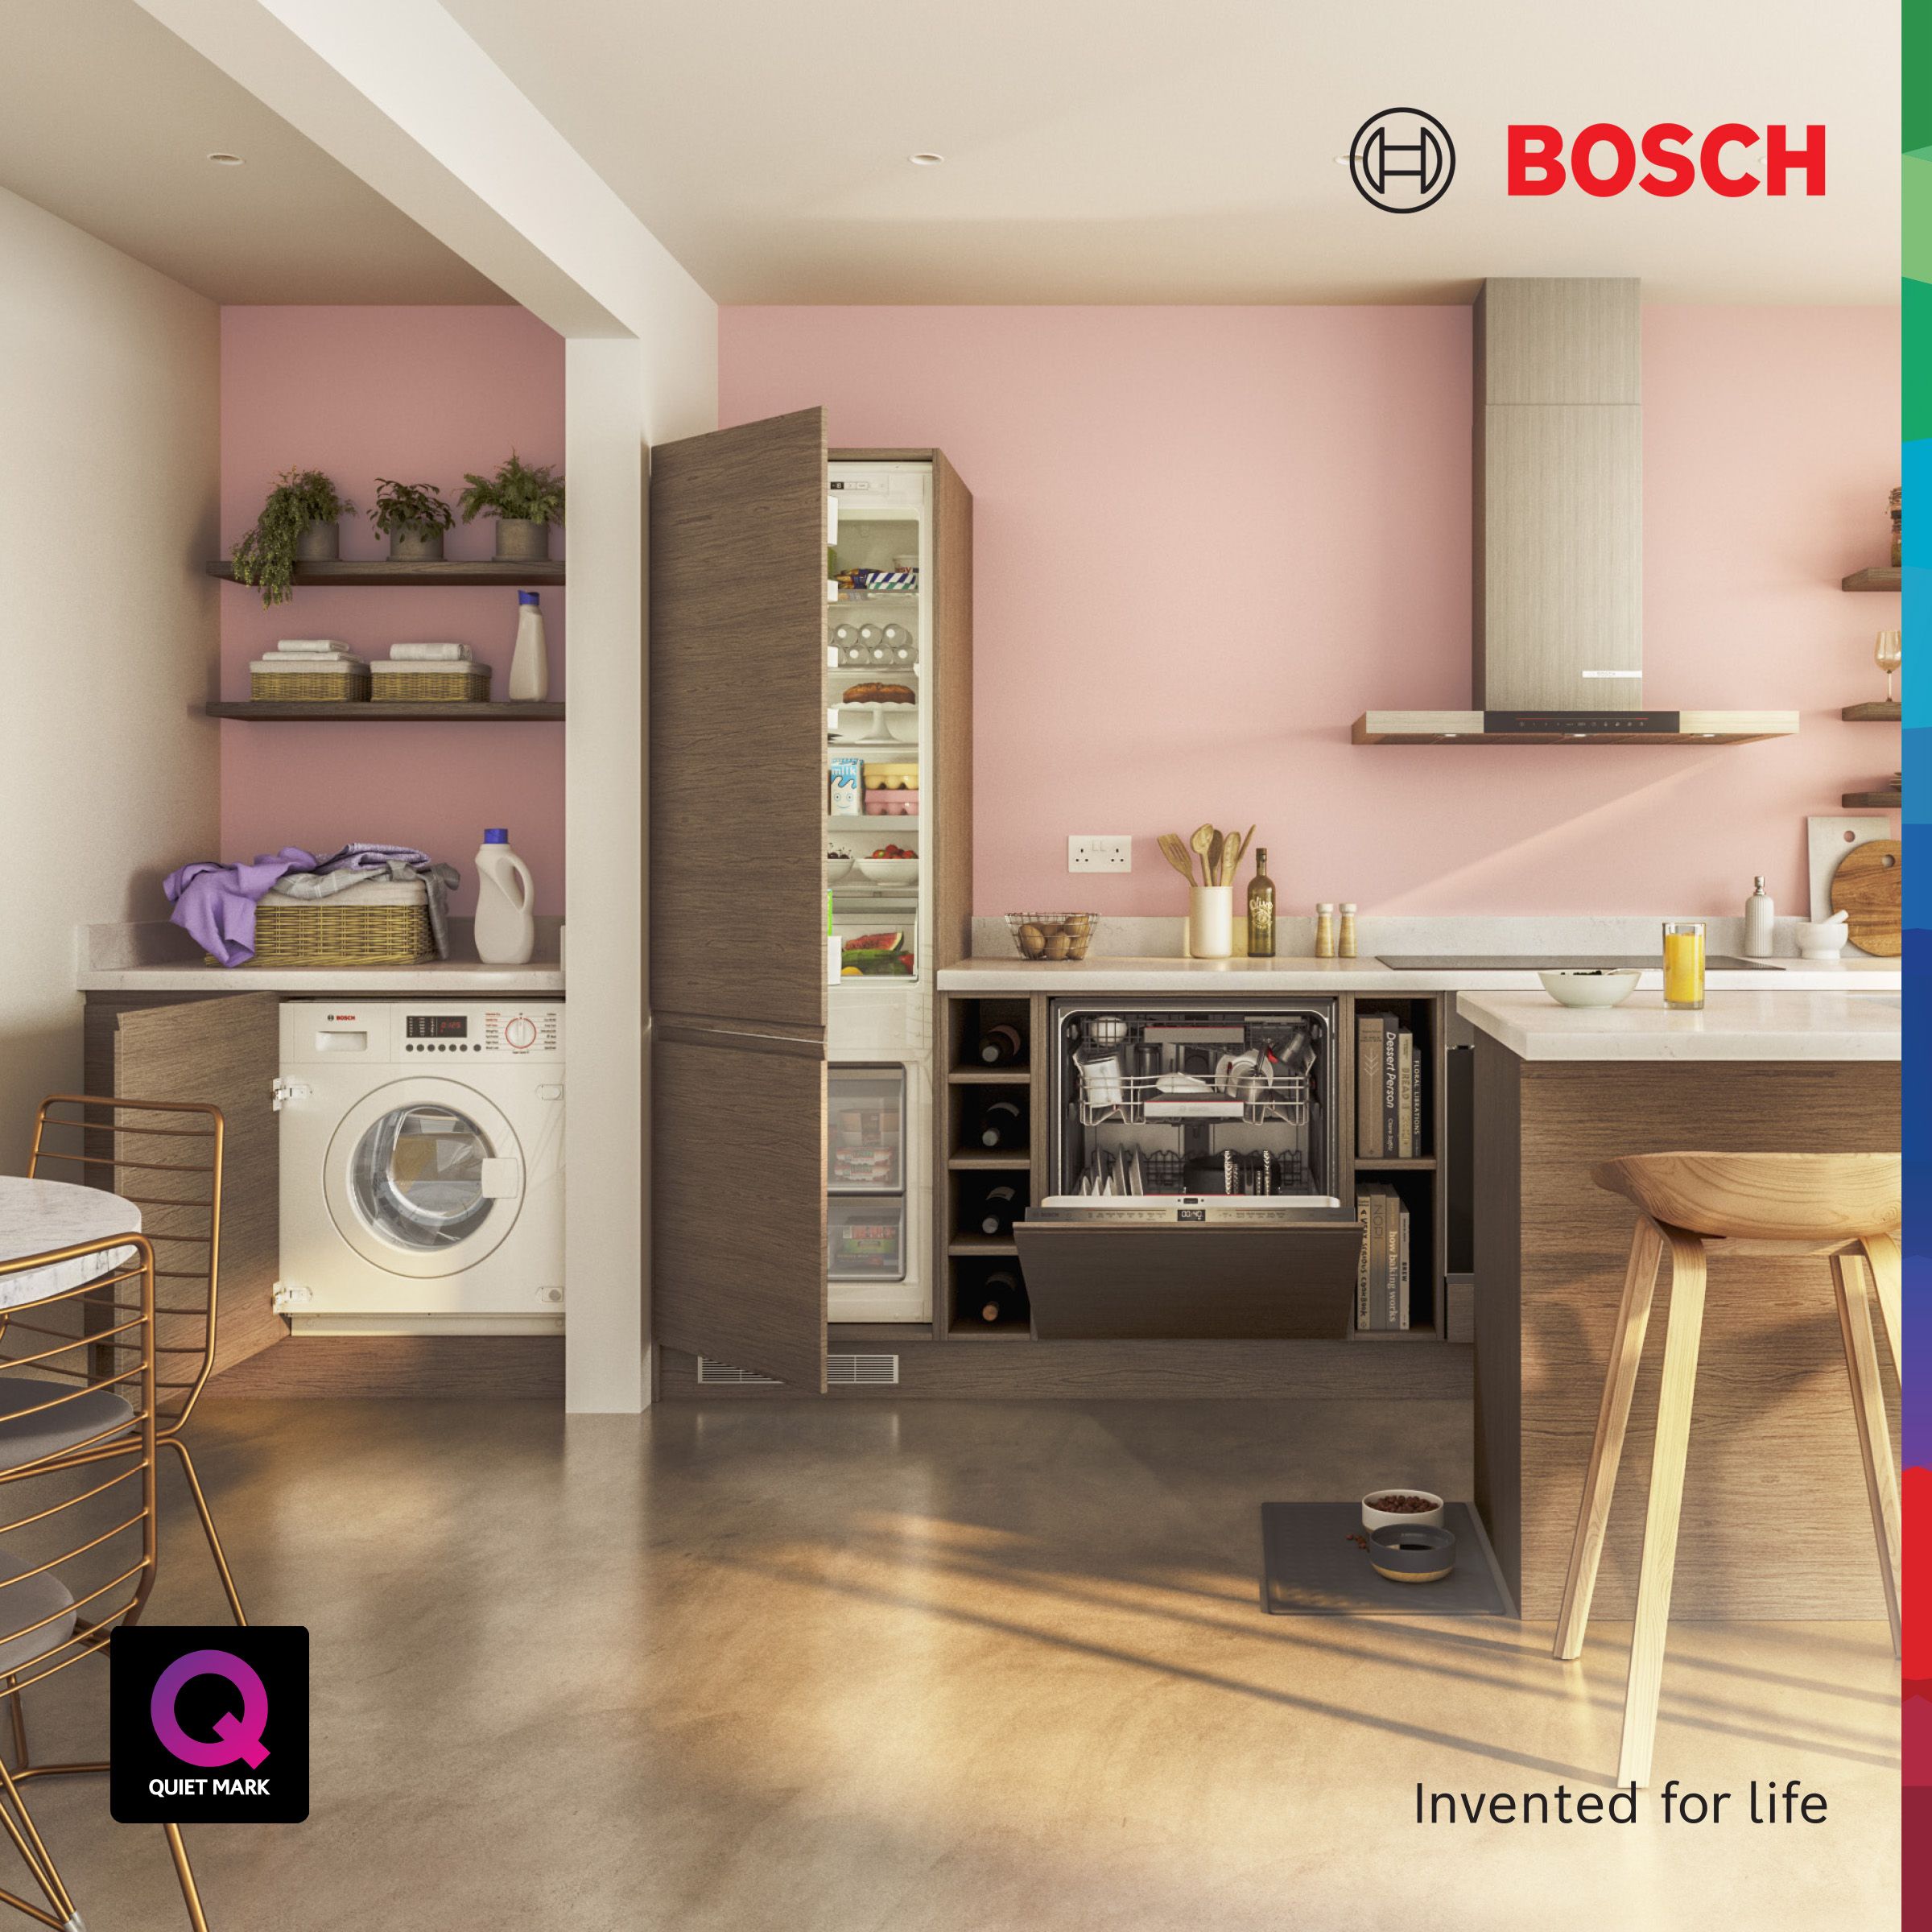 Live Quieter #LikeABosch - Selected Bosch home appliances have been certified with Quiet Mark. Now that’s quietly outstanding.